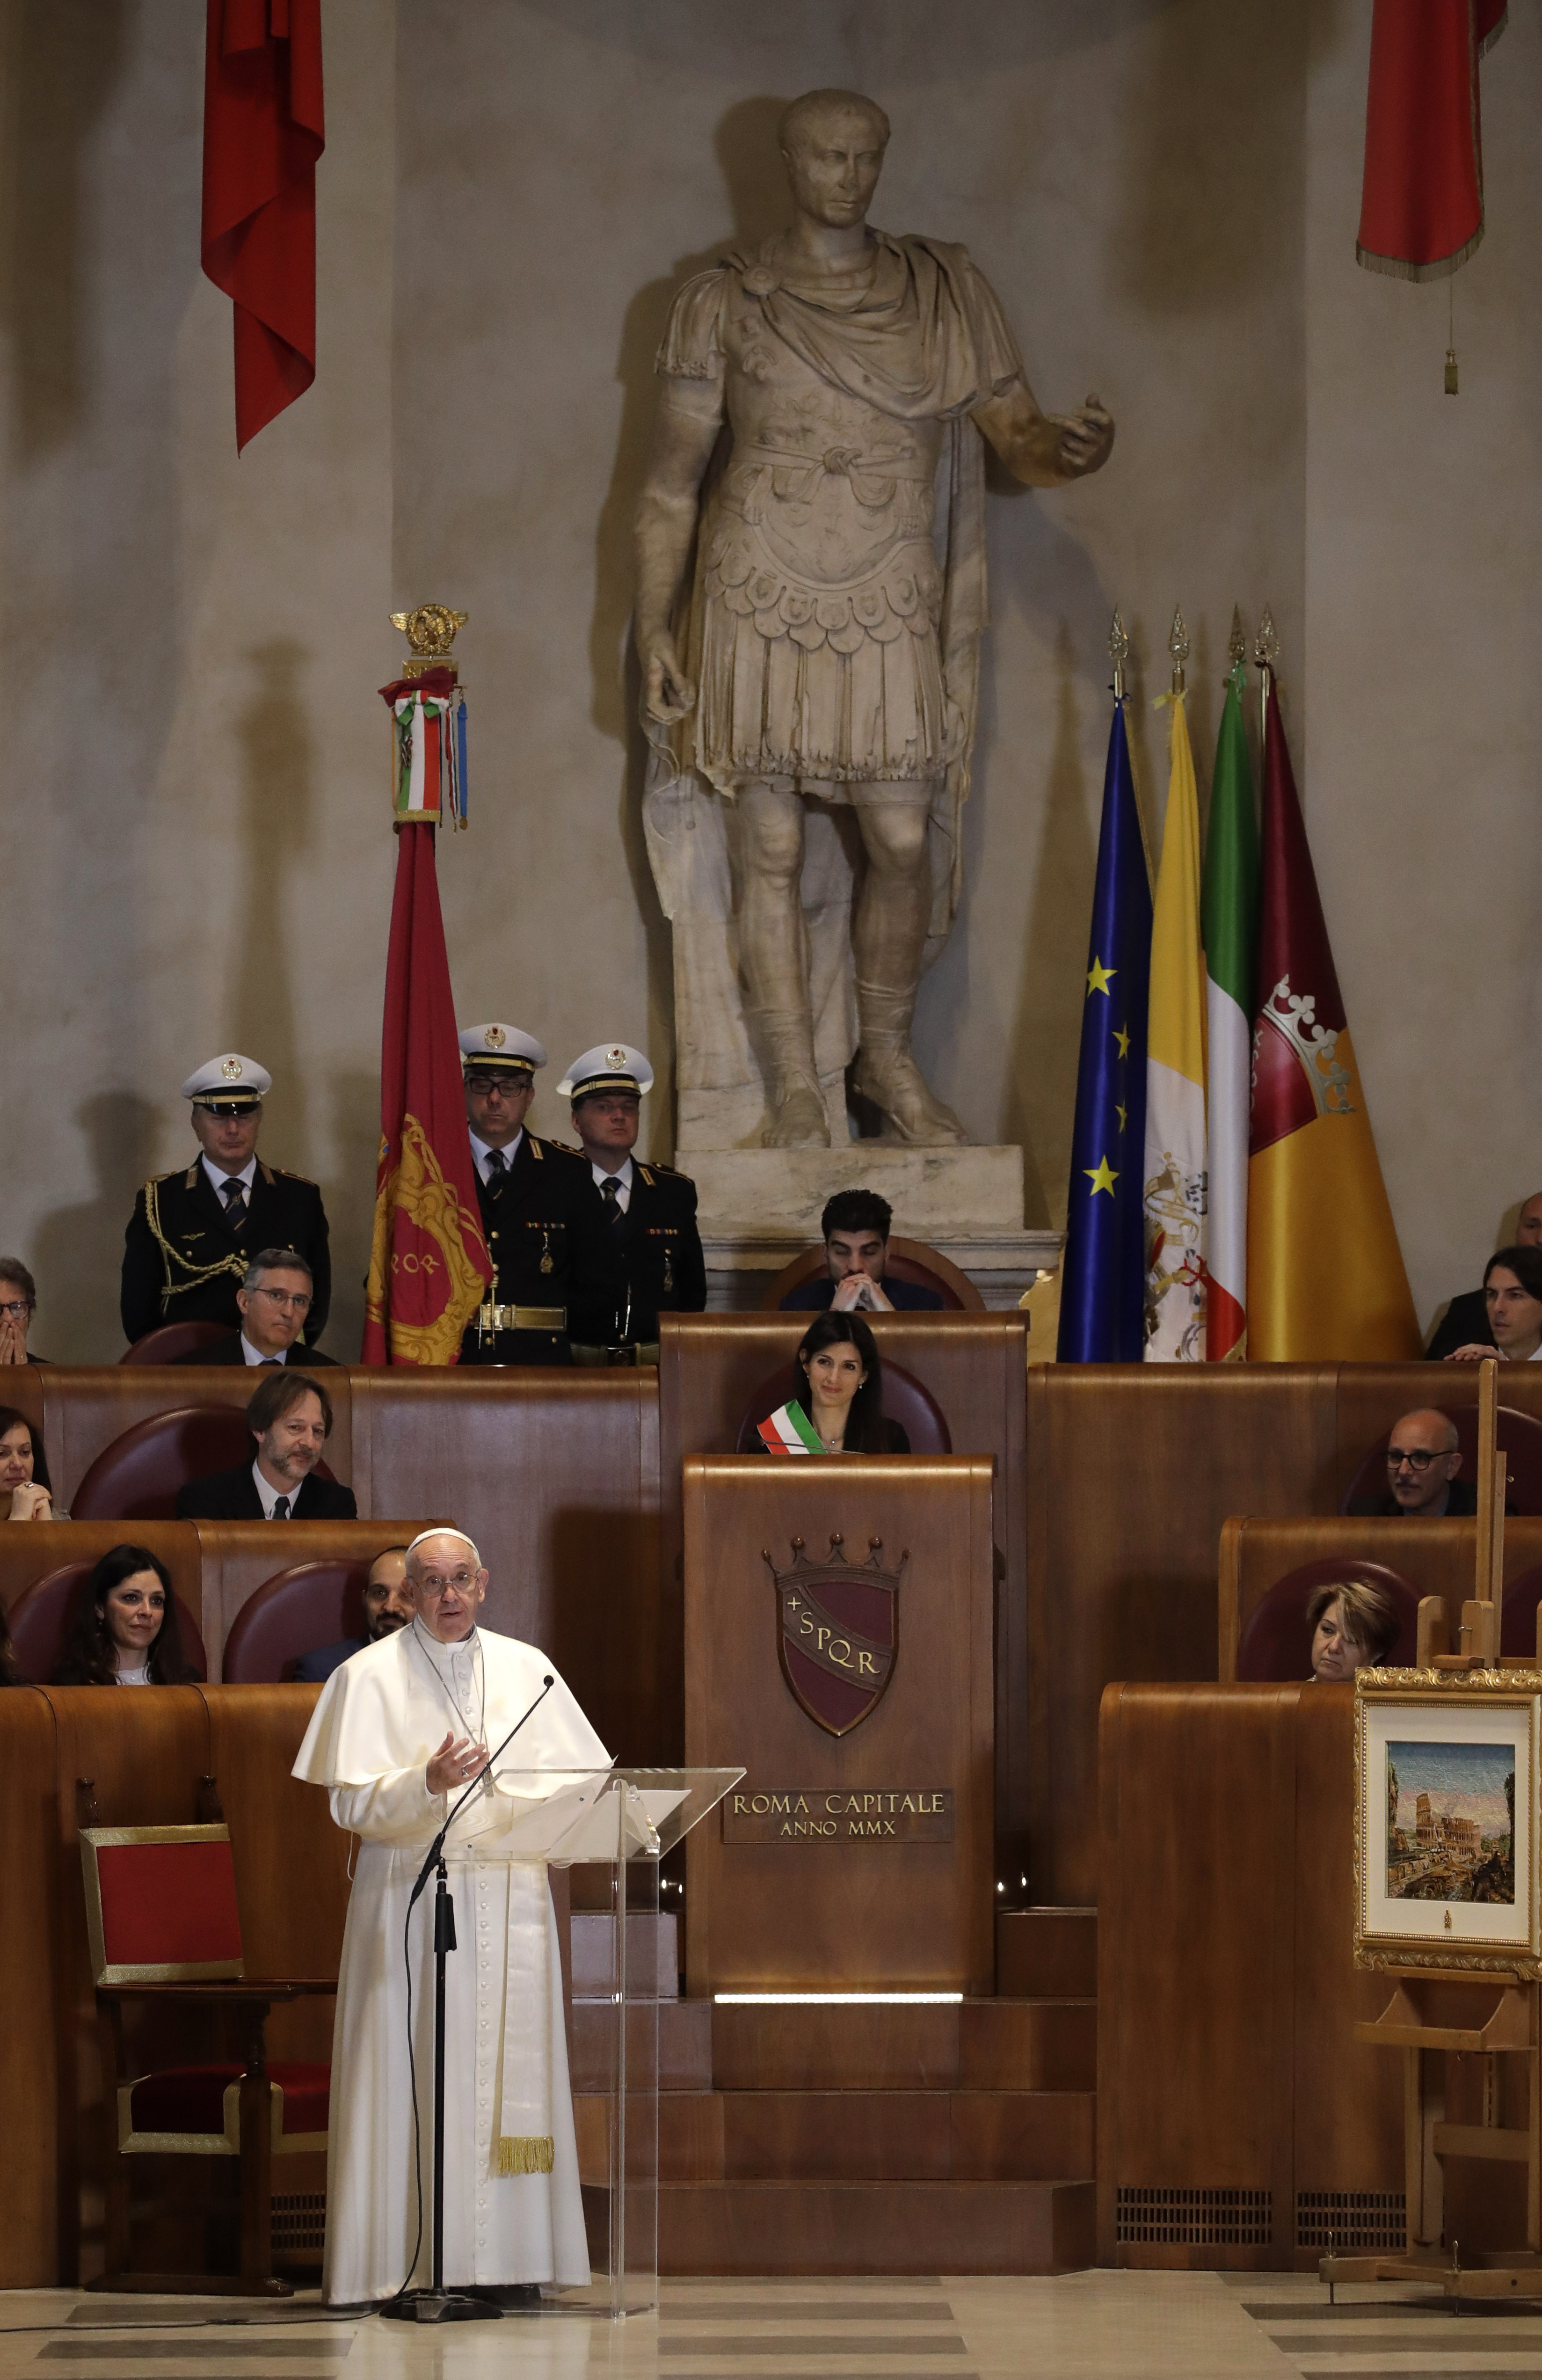 Pope Francis delivers his speech in the Julius Cesar Hall during his visit to the Campidoglio, Capitol Hill, in Rome, Tuesday, March 26, 2019. (AP Photo/Alessandra Tarantino)